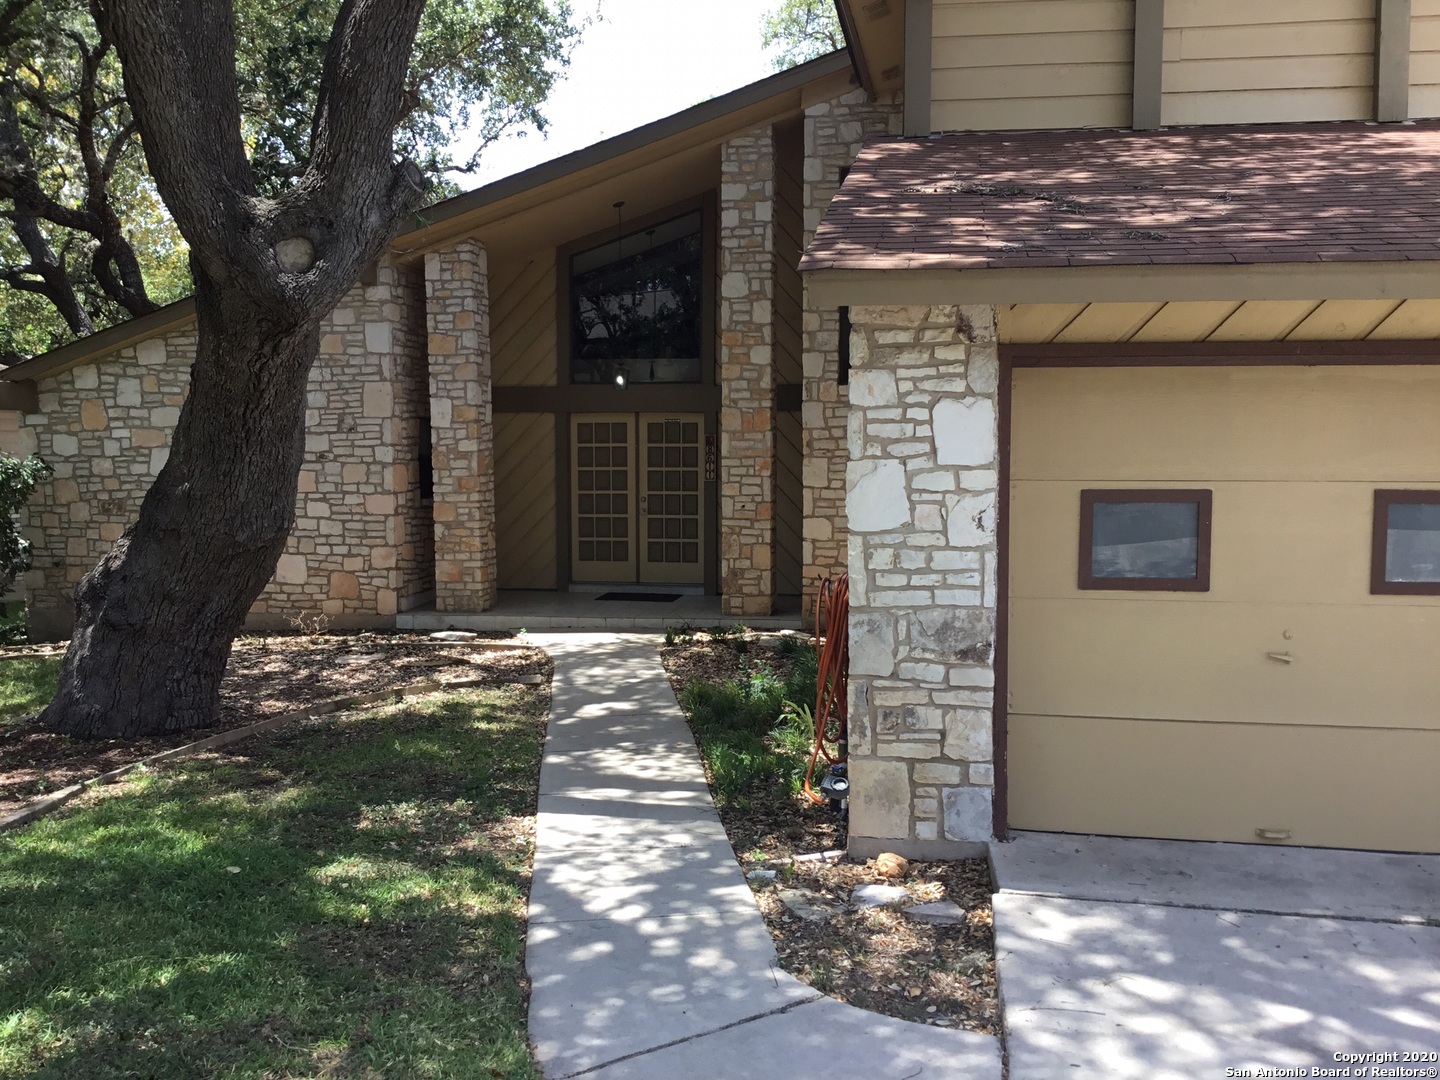 Photo of 8611 Timber W Dr in San Antonio, TX